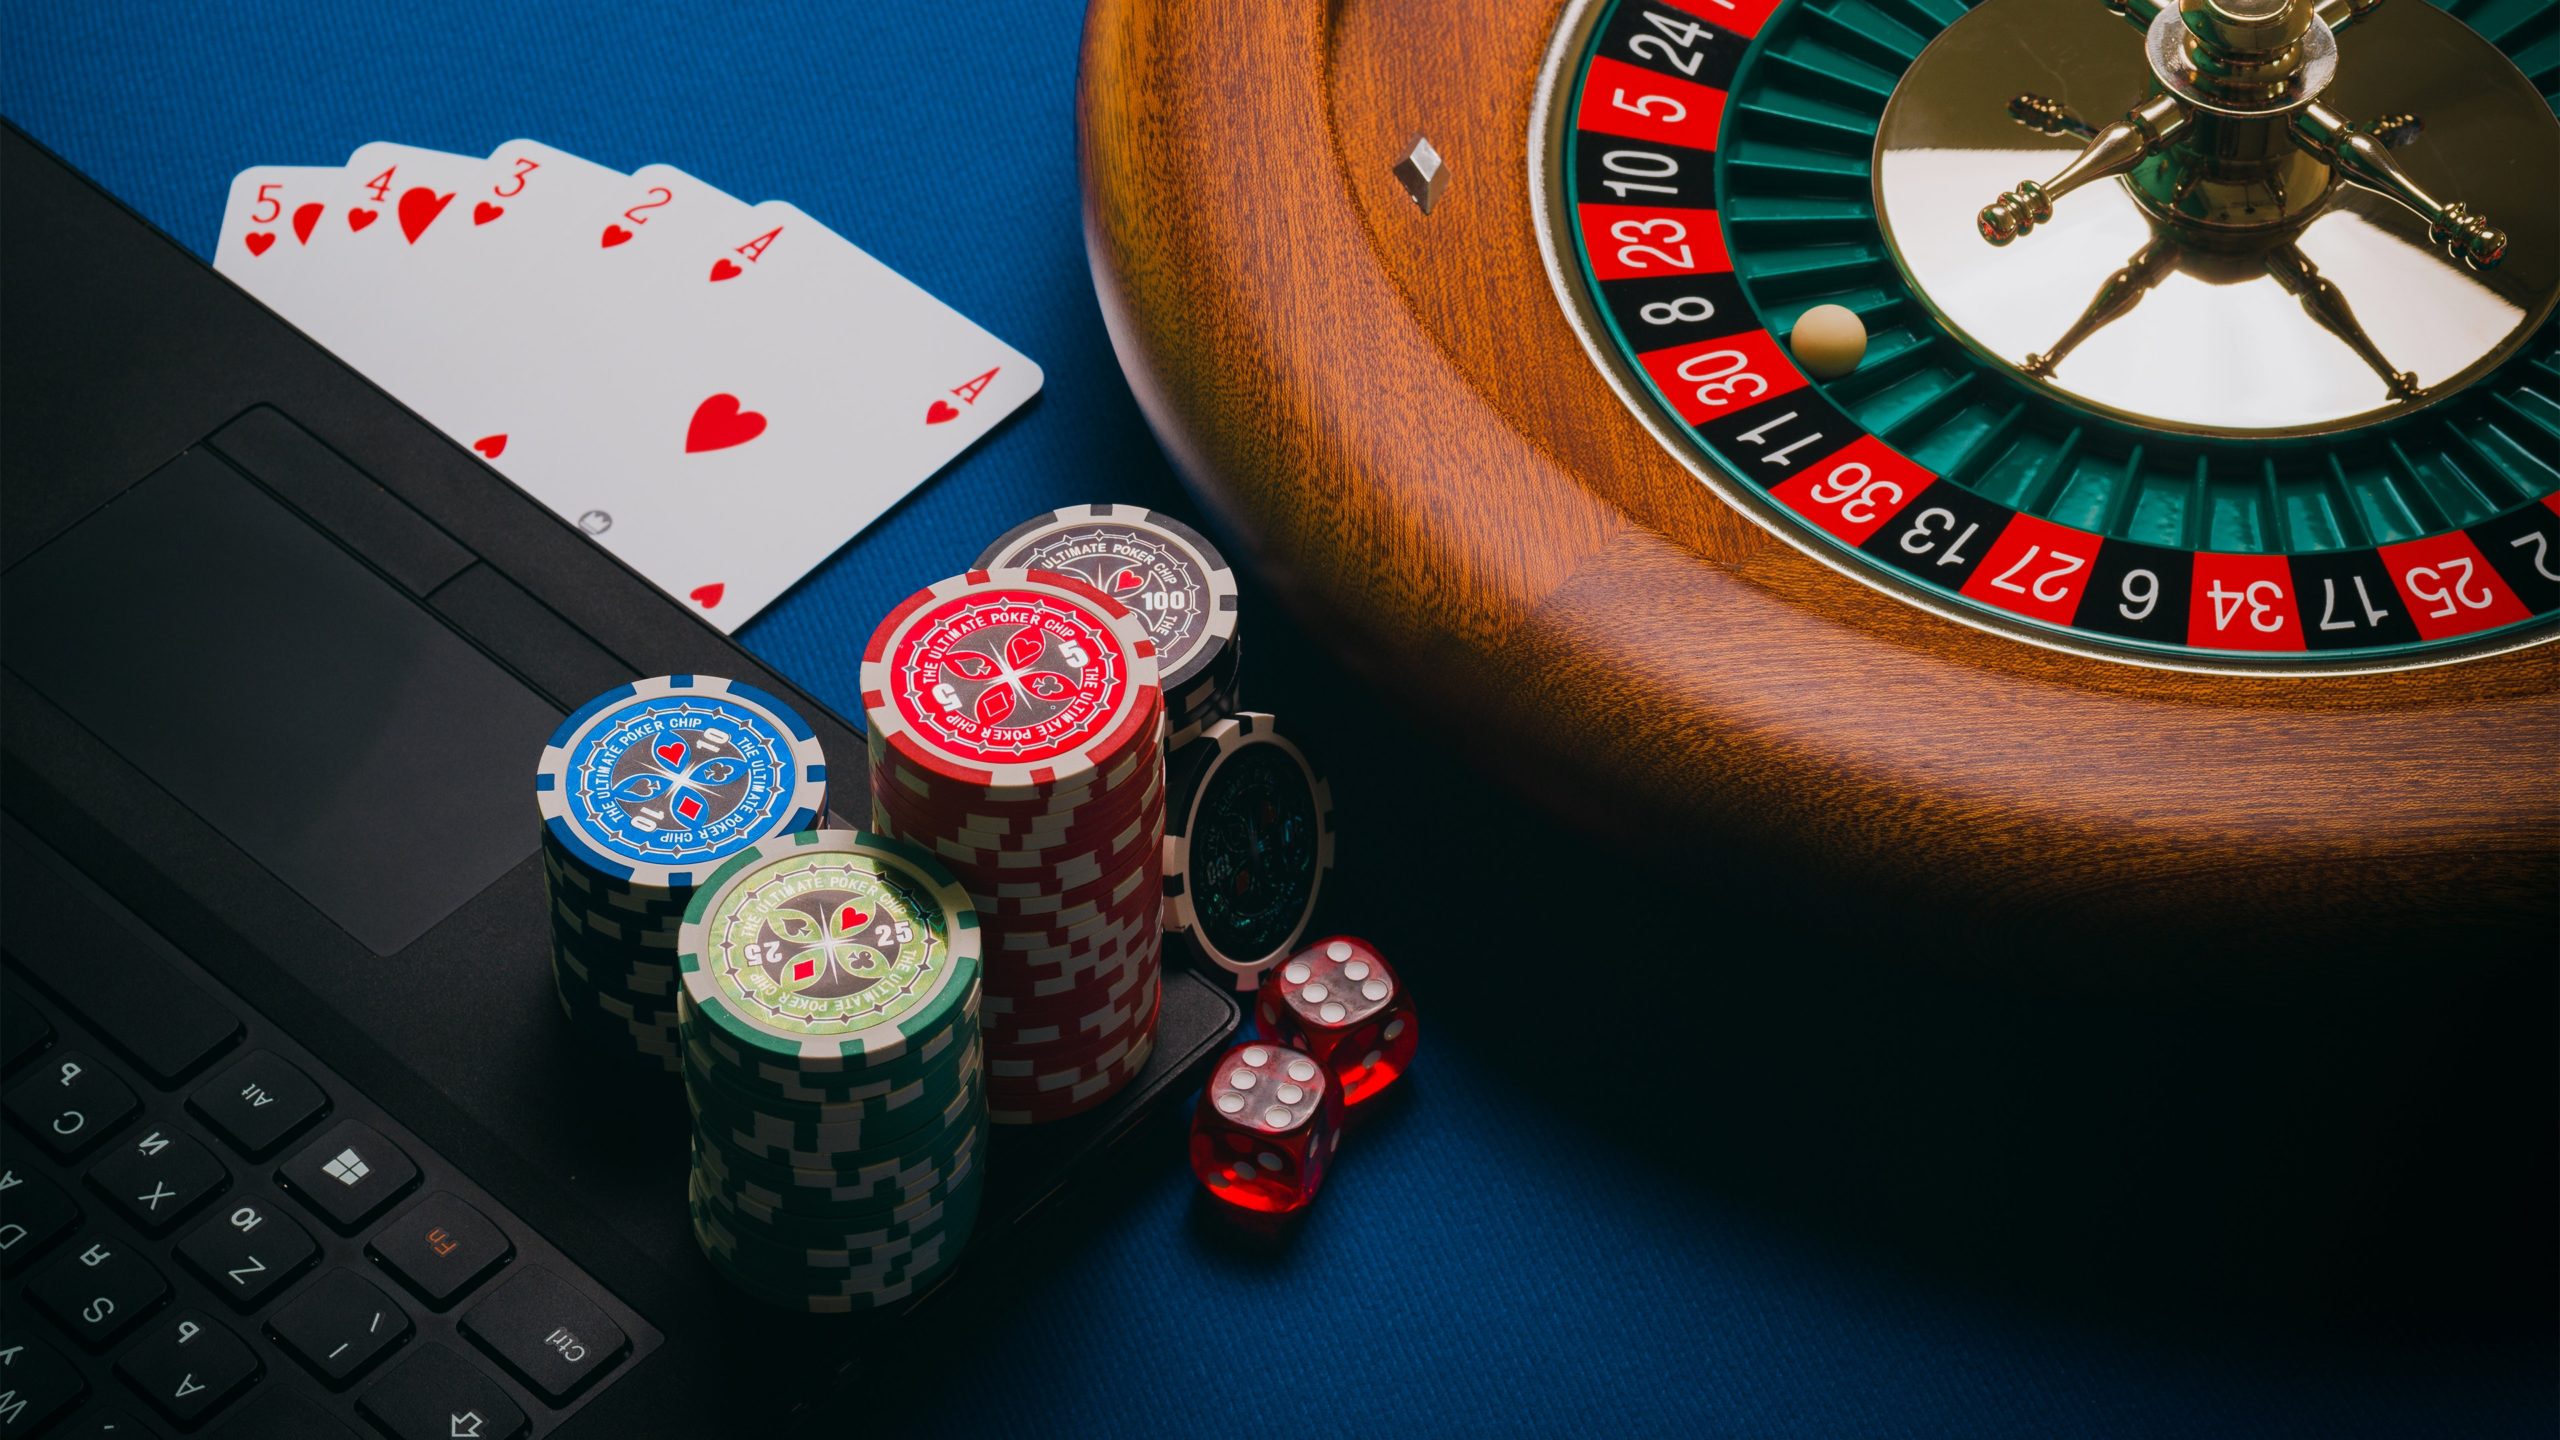 The website says gambling- an important article